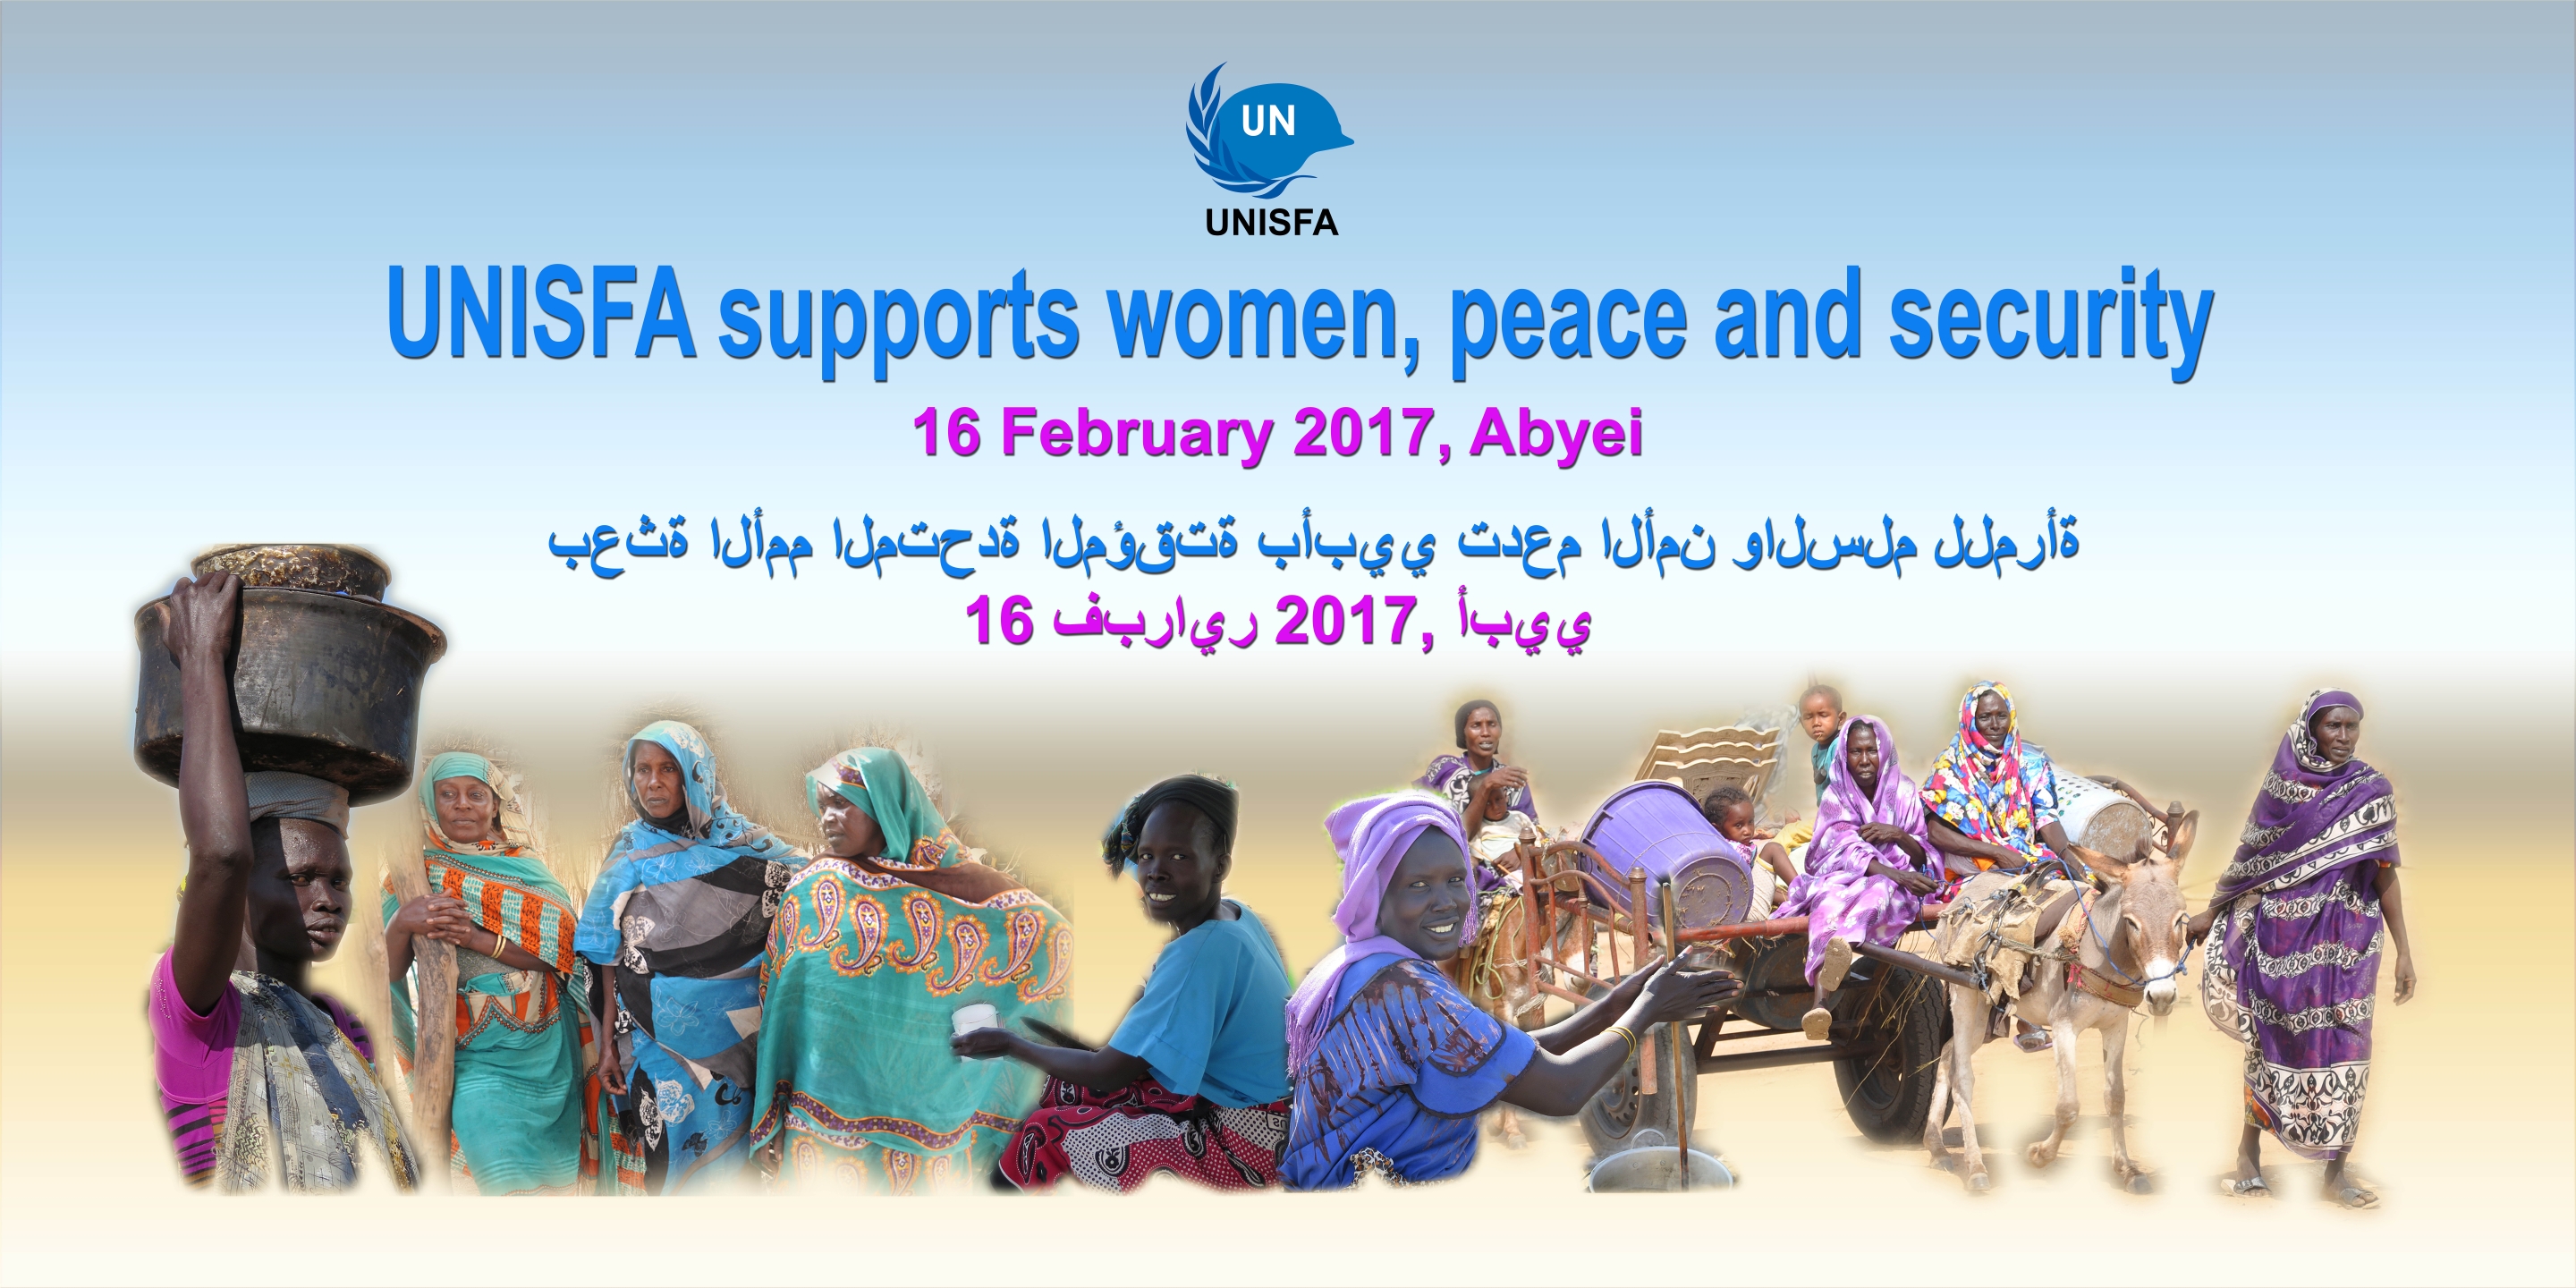 UNISFA supports women, peace and security